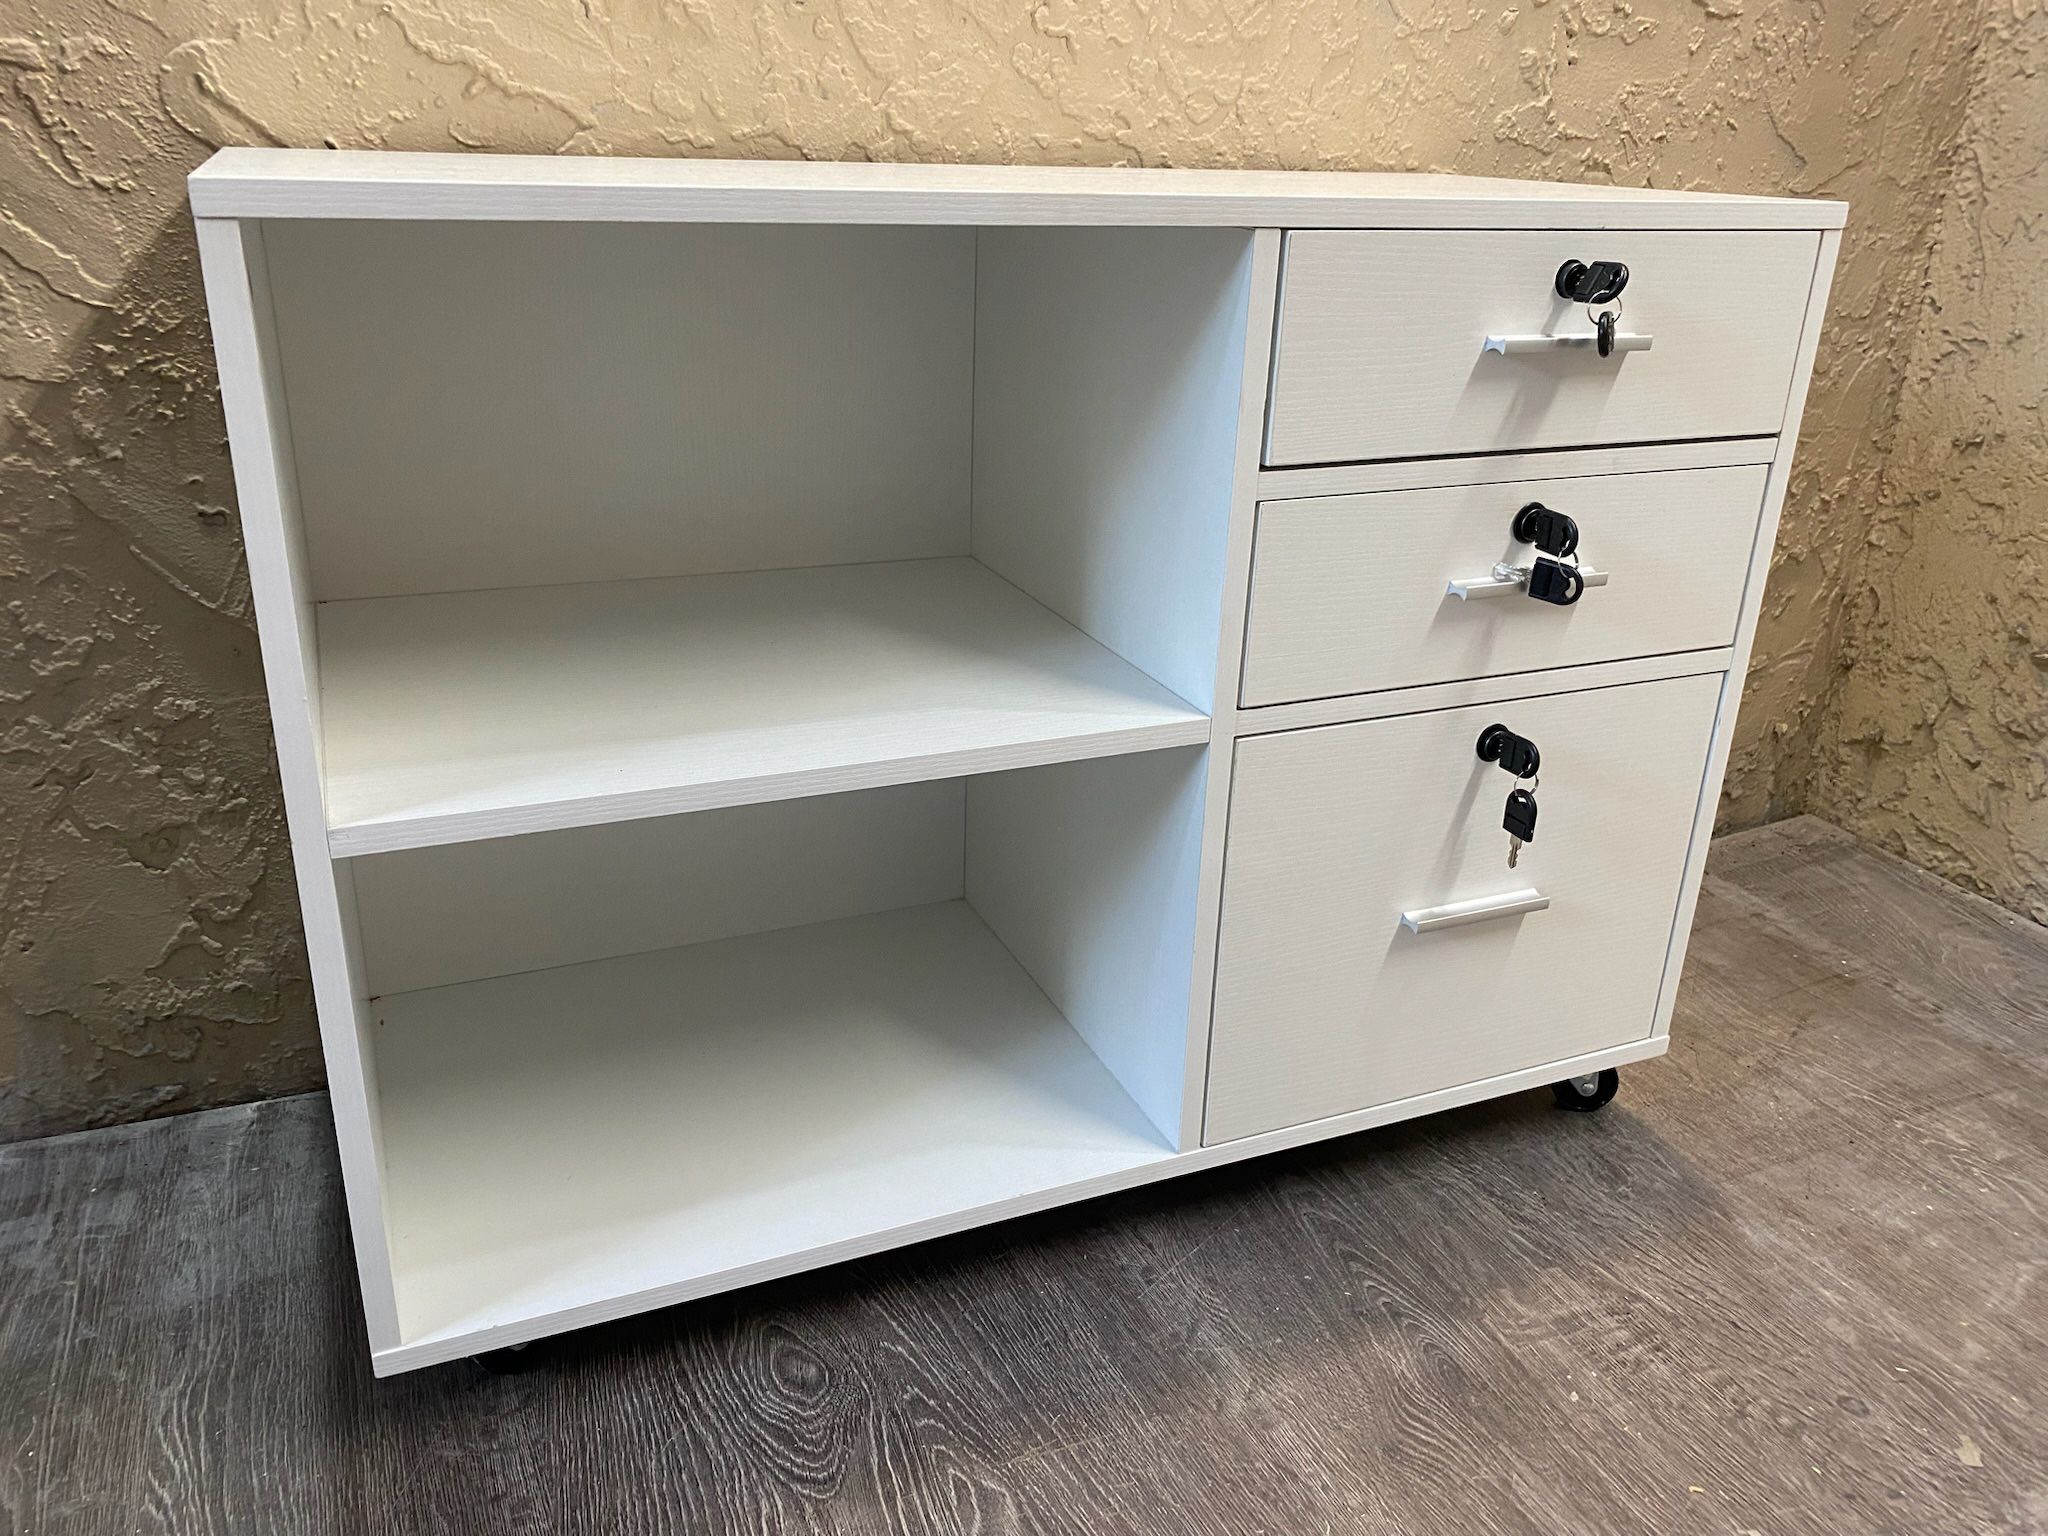 3 Drawer Mobile Filing Cabinet (3 unique keys)w/2 Open Shelves - Local Delivery For a Fee - See My Items